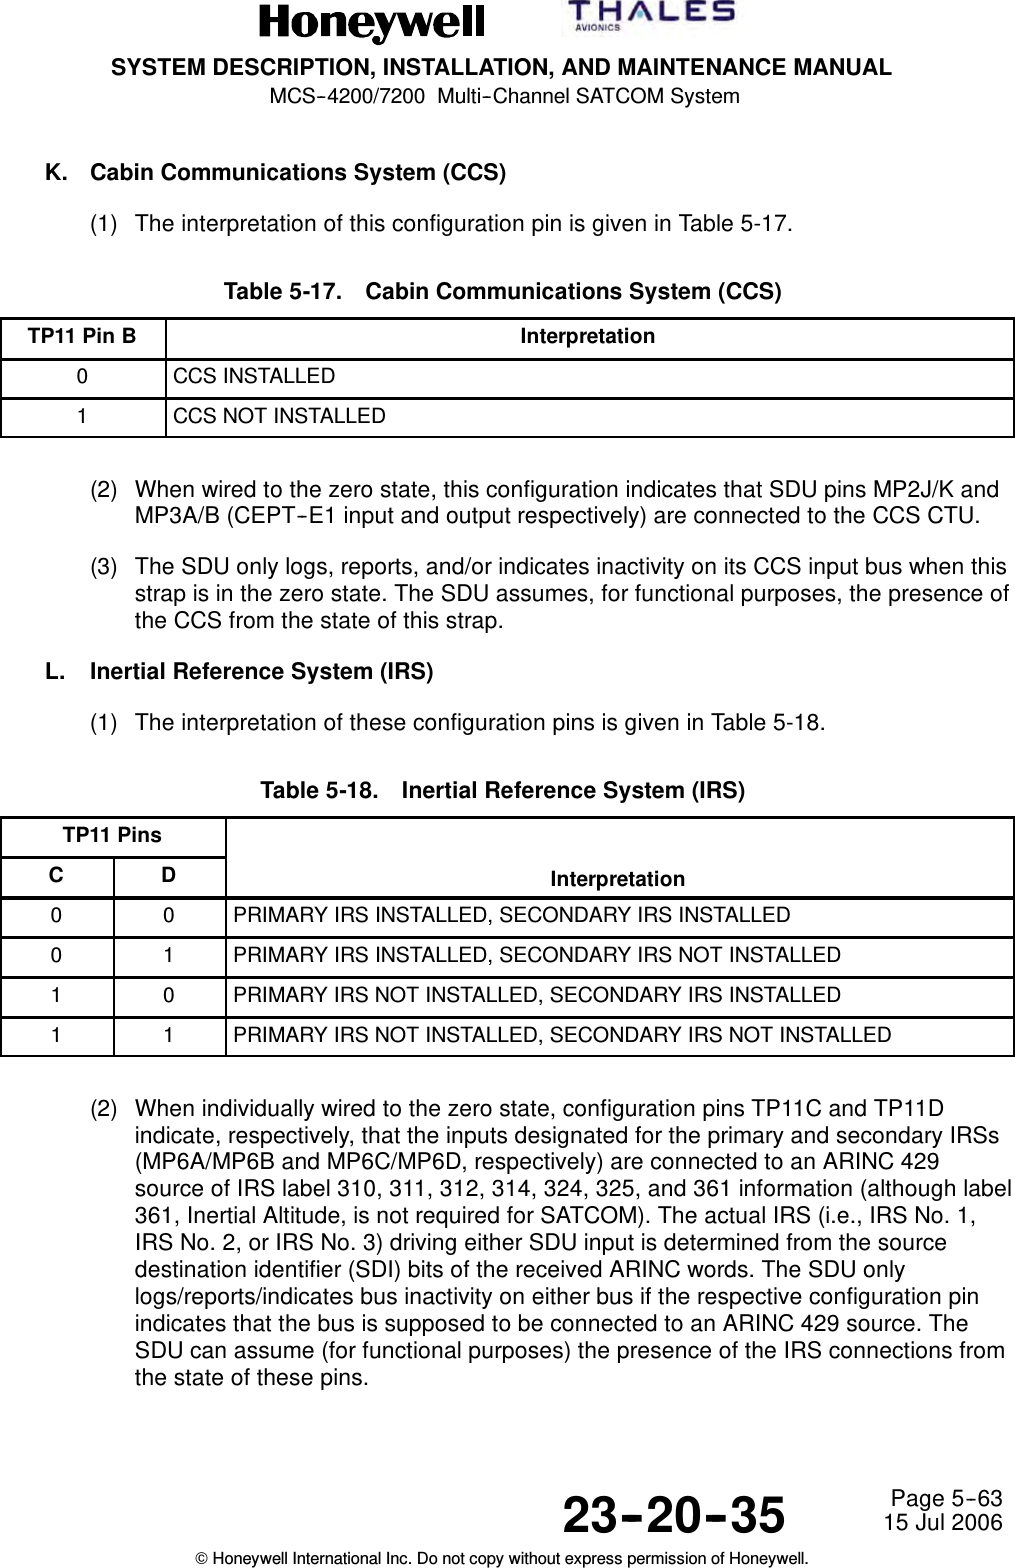 SYSTEM DESCRIPTION, INSTALLATION, AND MAINTENANCE MANUALMCS--4200/7200 Multi--Channel SATCOM System23--20--35 15 Jul 2006Honeywell International Inc. Do not copy without express permission of Honeywell.Page 5--63K. Cabin Communications System (CCS)(1) The interpretation of this configuration pin is given in Table 5-17.Table 5-17. Cabin Communications System (CCS)TP11 Pin B Interpretation0CCS INSTALLED1CCS NOT INSTALLED(2) When wired to the zero state, this configuration indicates that SDU pins MP2J/K andMP3A/B (CEPT--E1 input and output respectively) are connected to the CCS CTU.(3) The SDU only logs, reports, and/or indicates inactivity on its CCS input bus when thisstrap is in the zero state. The SDU assumes, for functional purposes, the presence ofthe CCS from the state of this strap.L. Inertial Reference System (IRS)(1) The interpretation of these configuration pins is given in Table 5-18.Table 5-18. Inertial Reference System (IRS)TP11 PinsC D Interpretation0 0 PRIMARY IRS INSTALLED, SECONDARY IRS INSTALLED0 1 PRIMARY IRS INSTALLED, SECONDARY IRS NOT INSTALLED1 0 PRIMARY IRS NOT INSTALLED, SECONDARY IRS INSTALLED1 1 PRIMARY IRS NOT INSTALLED, SECONDARY IRS NOT INSTALLED(2) When individually wired to the zero state, configuration pins TP11C and TP11Dindicate, respectively, that the inputs designated for the primary and secondary IRSs(MP6A/MP6B and MP6C/MP6D, respectively) are connected to an ARINC 429source of IRS label 310, 311, 312, 314, 324, 325, and 361 information (although label361, Inertial Altitude, is not required for SATCOM). The actual IRS (i.e., IRS No. 1,IRS No. 2, or IRS No. 3) driving either SDU input is determined from the sourcedestination identifier (SDI) bits of the received ARINC words. The SDU onlylogs/reports/indicates bus inactivity on either bus if the respective configuration pinindicates that the bus is supposed to be connected to an ARINC 429 source. TheSDU can assume (for functional purposes) the presence of the IRS connections fromthe state of these pins.